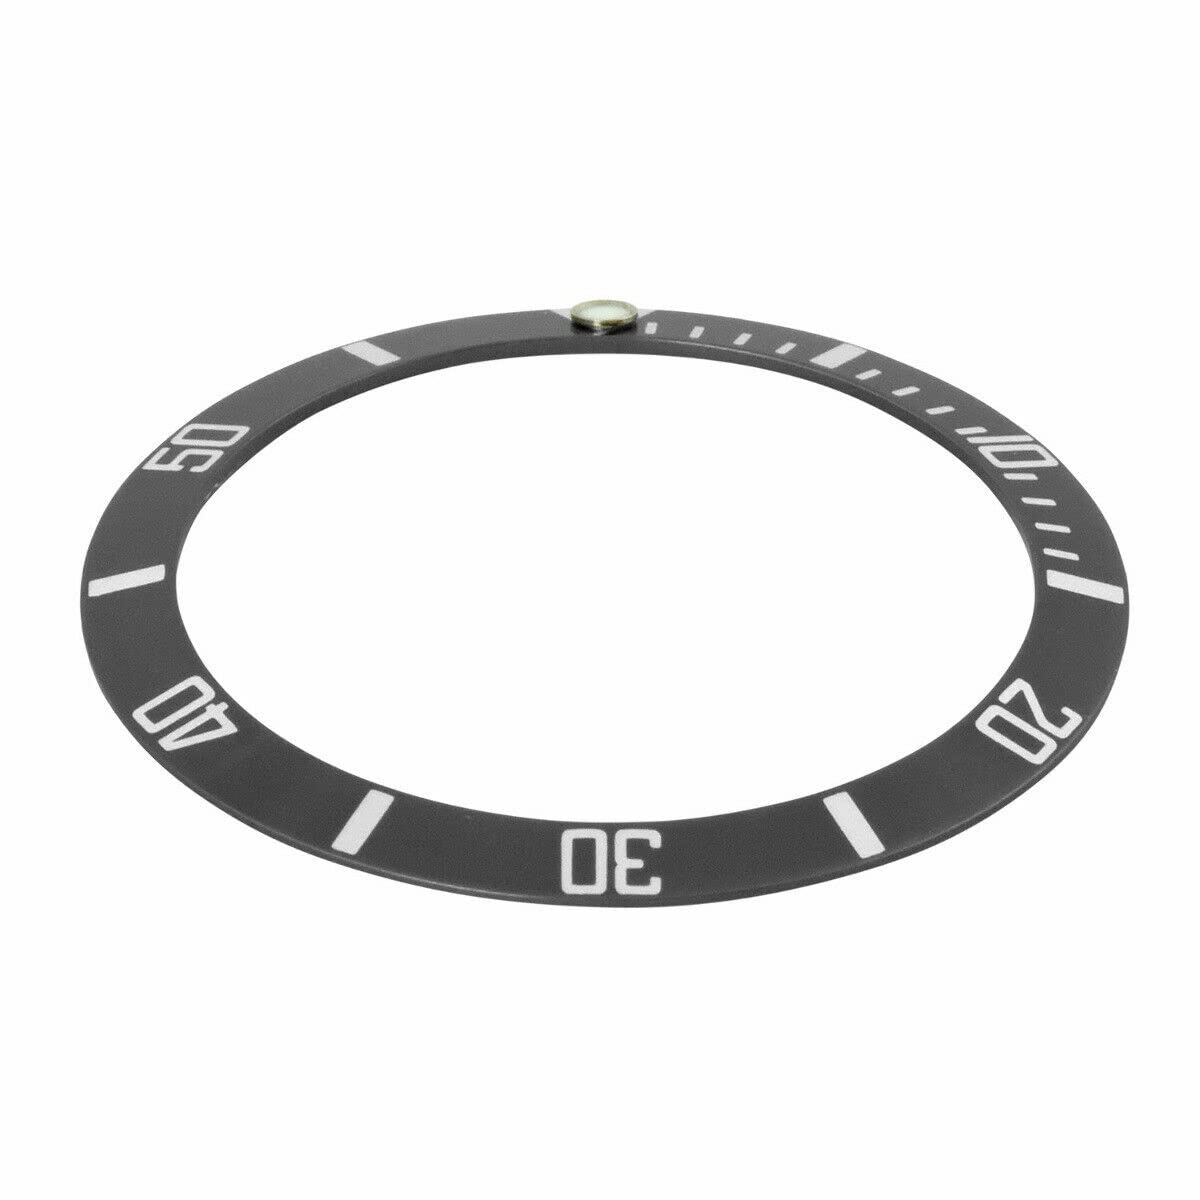 REPLACEMENT SUBMARINER BEZEL INSERT COMPATIBLE WITH ROLEX 16800, 16610 GREY GRAY